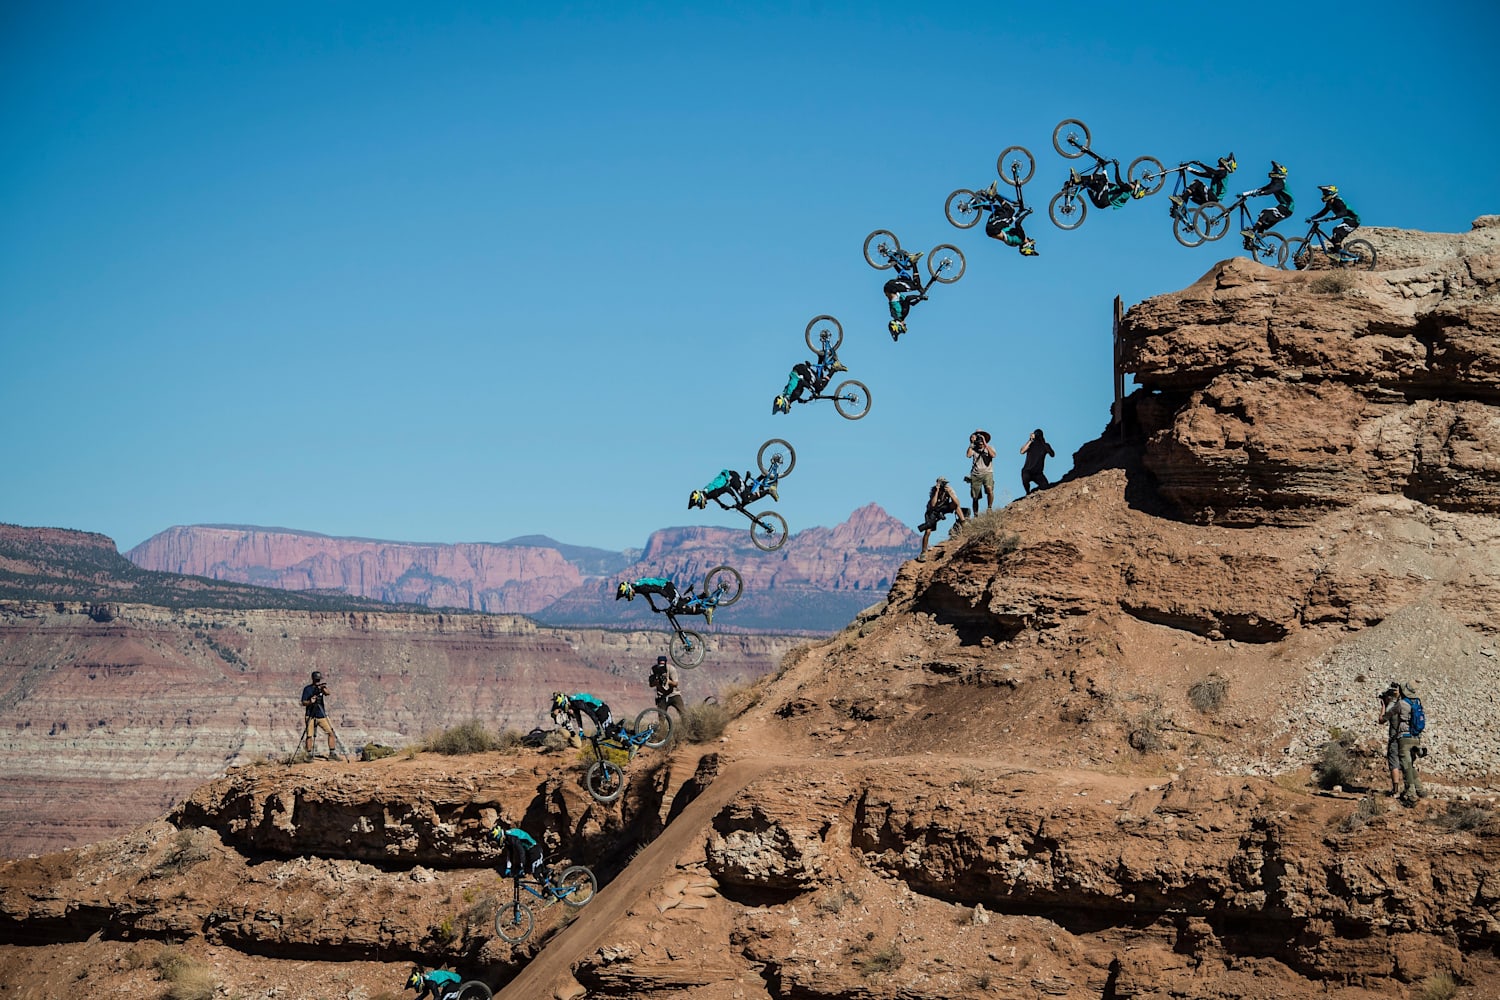 red bull rampage 2018 tickets